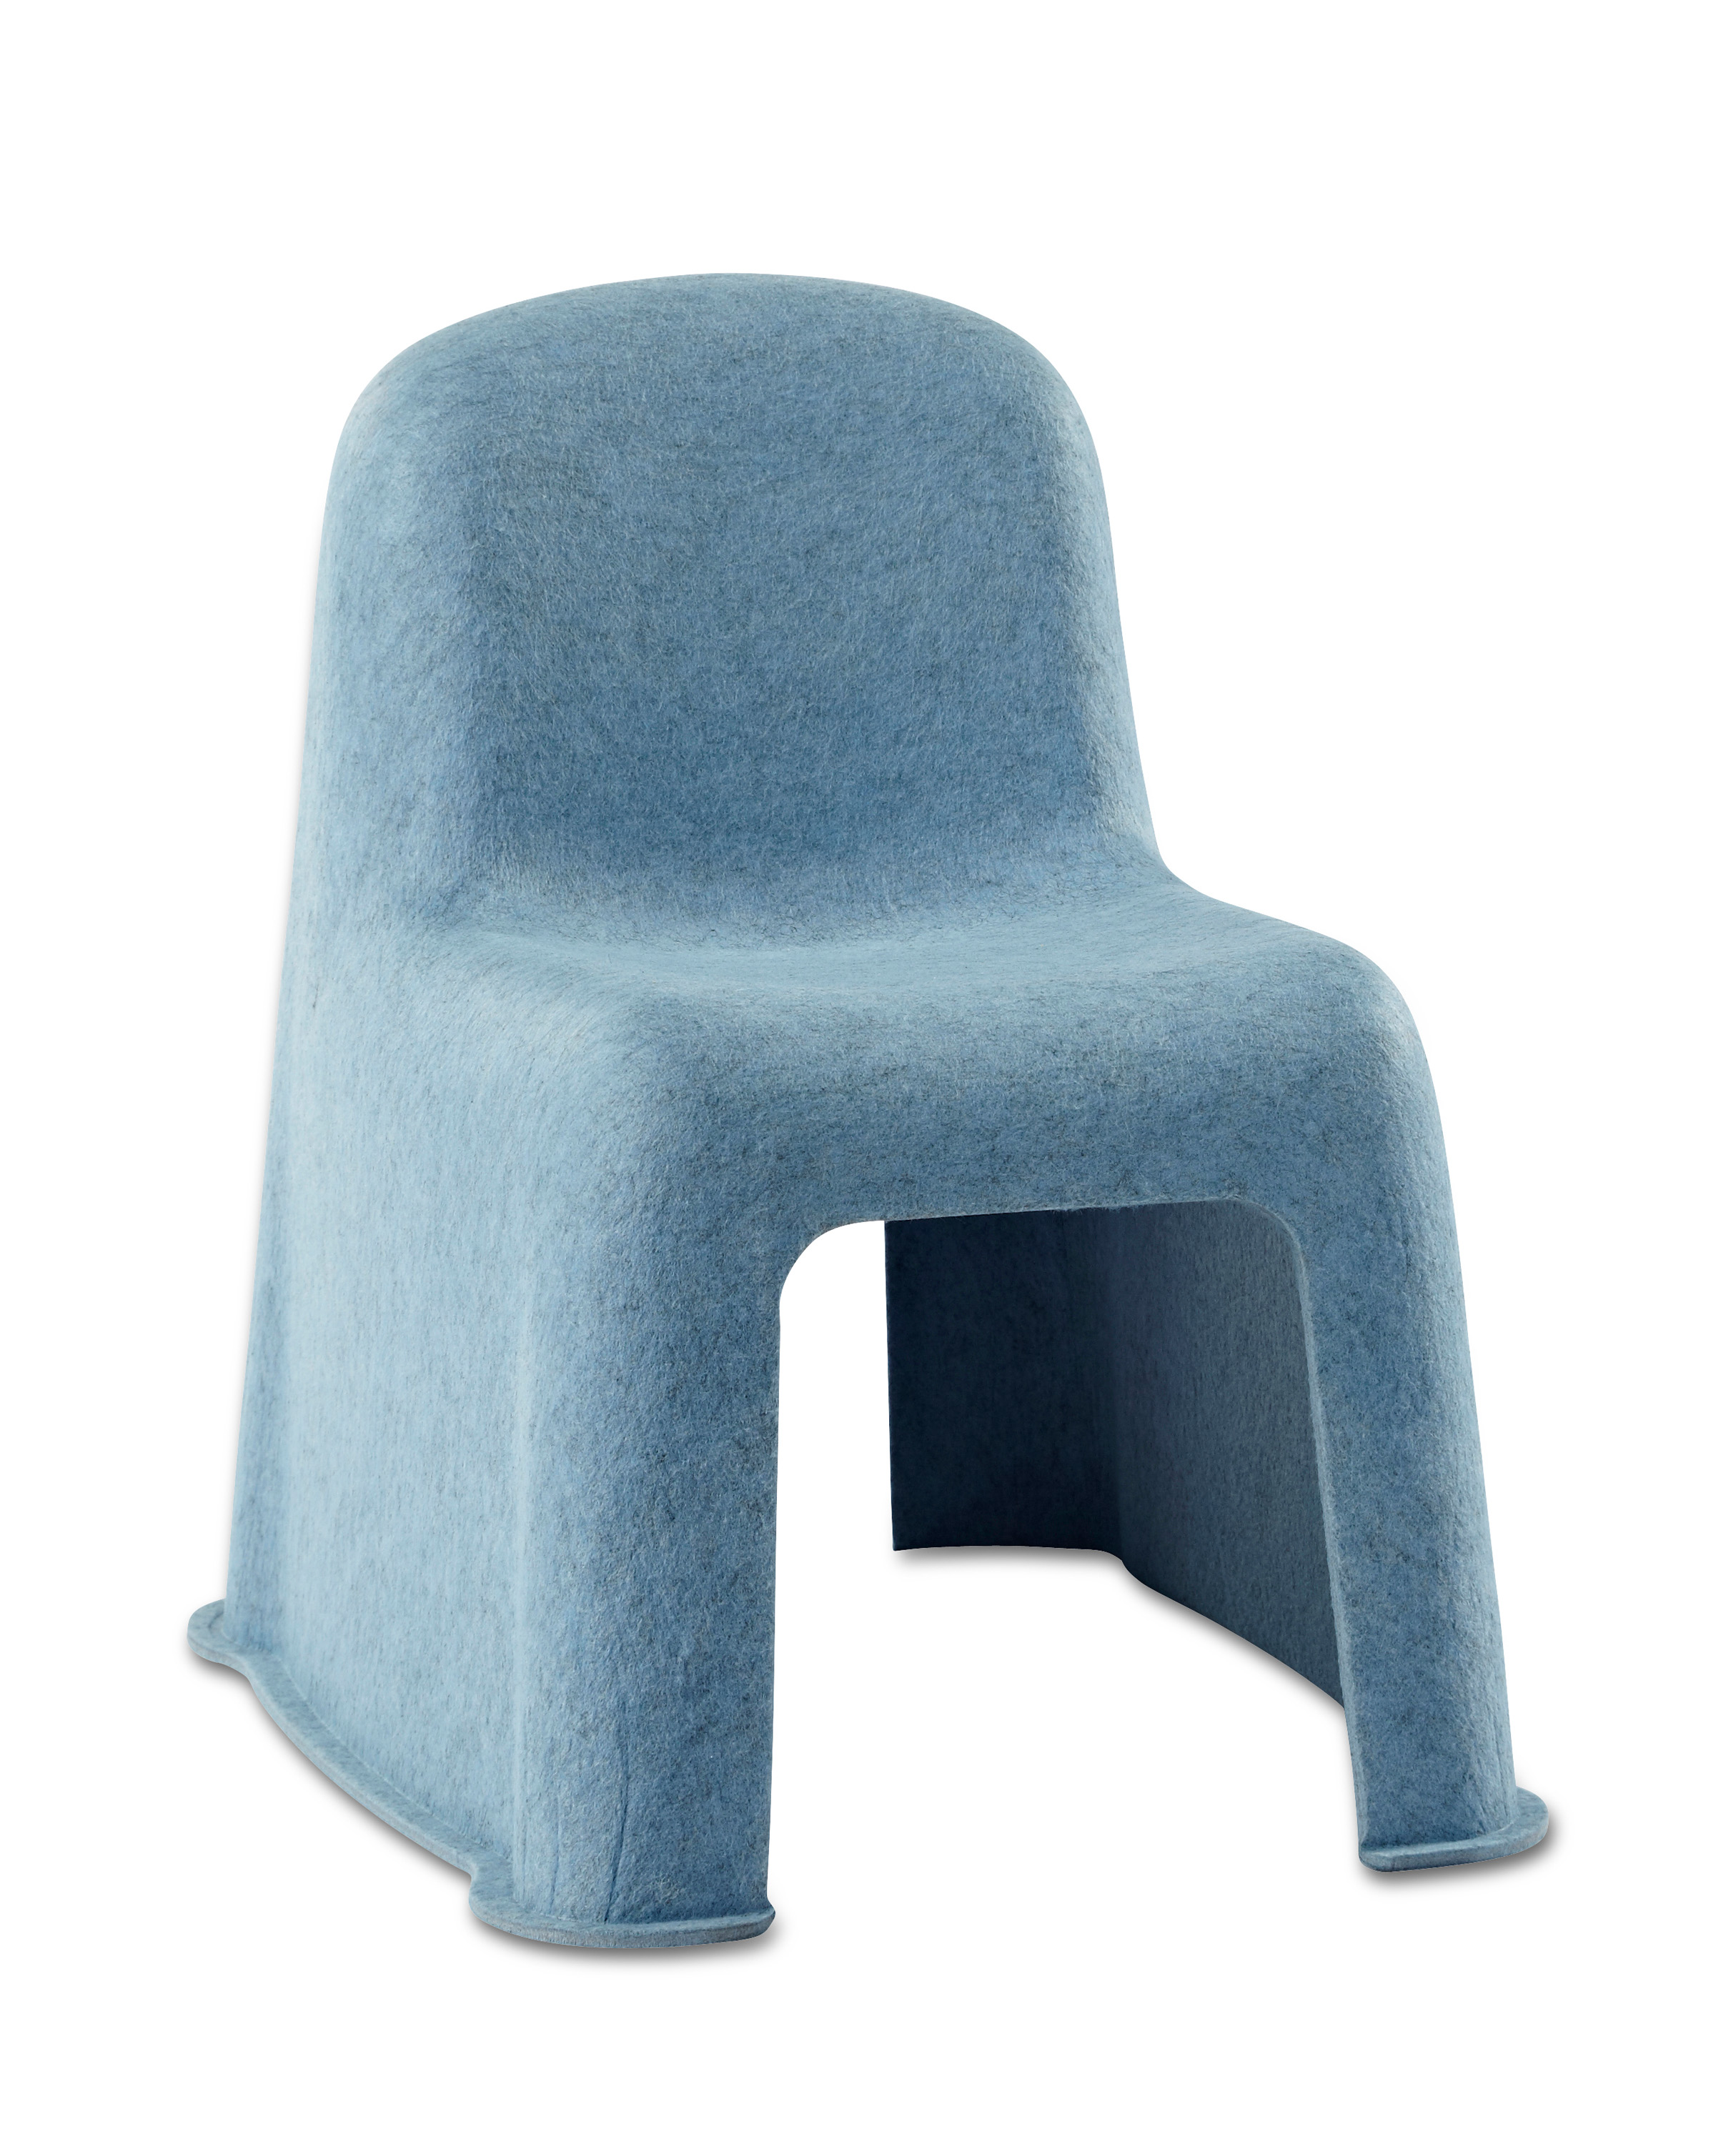 <p>Komplot Design (born 1953)<br />
Poul Christiansen (born 1947)<br />
Manufactured by HAY (est 2002)</p>

<p><em>Little NOBODY</em></p>

<p>2007 (designed)<br />
PET felt, polymer fibre, recycled material from plastic bottles</p>

<p>Deceptively simple in its appearance, the <em>Little NOBODY</em> is an innovative re-vision of a chair&rsquo;s construction. The first industrially produced chair ever to be made out of solely textile construction, the <em>Little NOBODY</em> chair is also radical in that it is entirely made out of recycled plastic water bottles that have been converted into PET felt. Moulded in a single piece in a thermos-pressing process, the <em>Little NOBODY</em> has no frame and its construction requires neither glues, resins, screws nor reinforcements.</p>